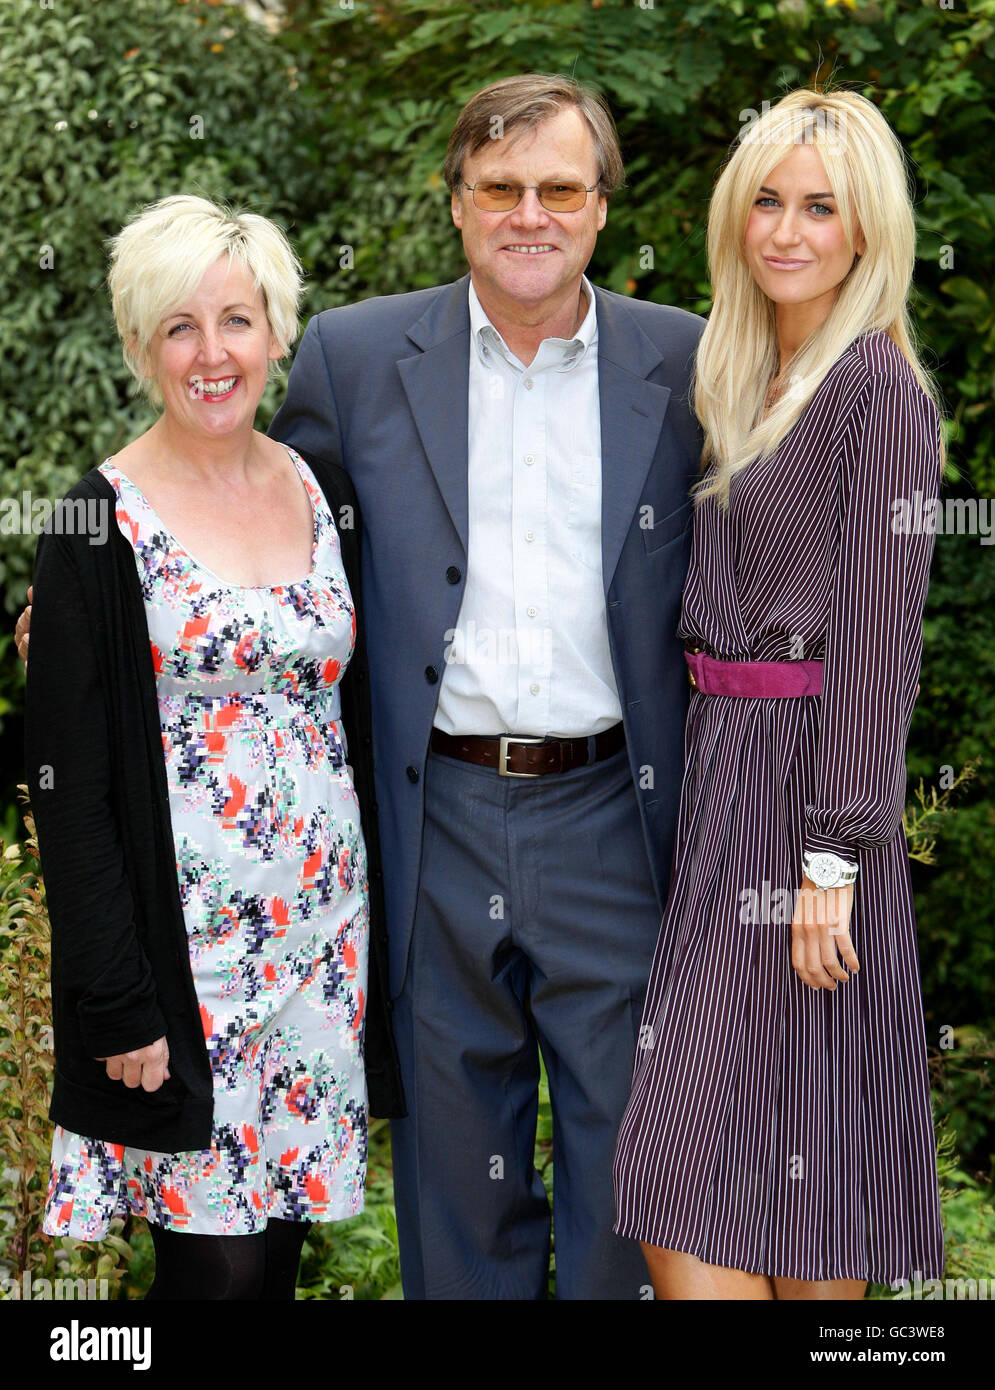 Coronation Street stars (left to right) Julie Hesmondhalgh (Hayley Cropper), David Neilson (Roy Cropper) and Katherine Kelly (Becky Granger) launch the Coronation Street Romanian Holiday DVD at Granada Studios in Manchester. Stock Photo